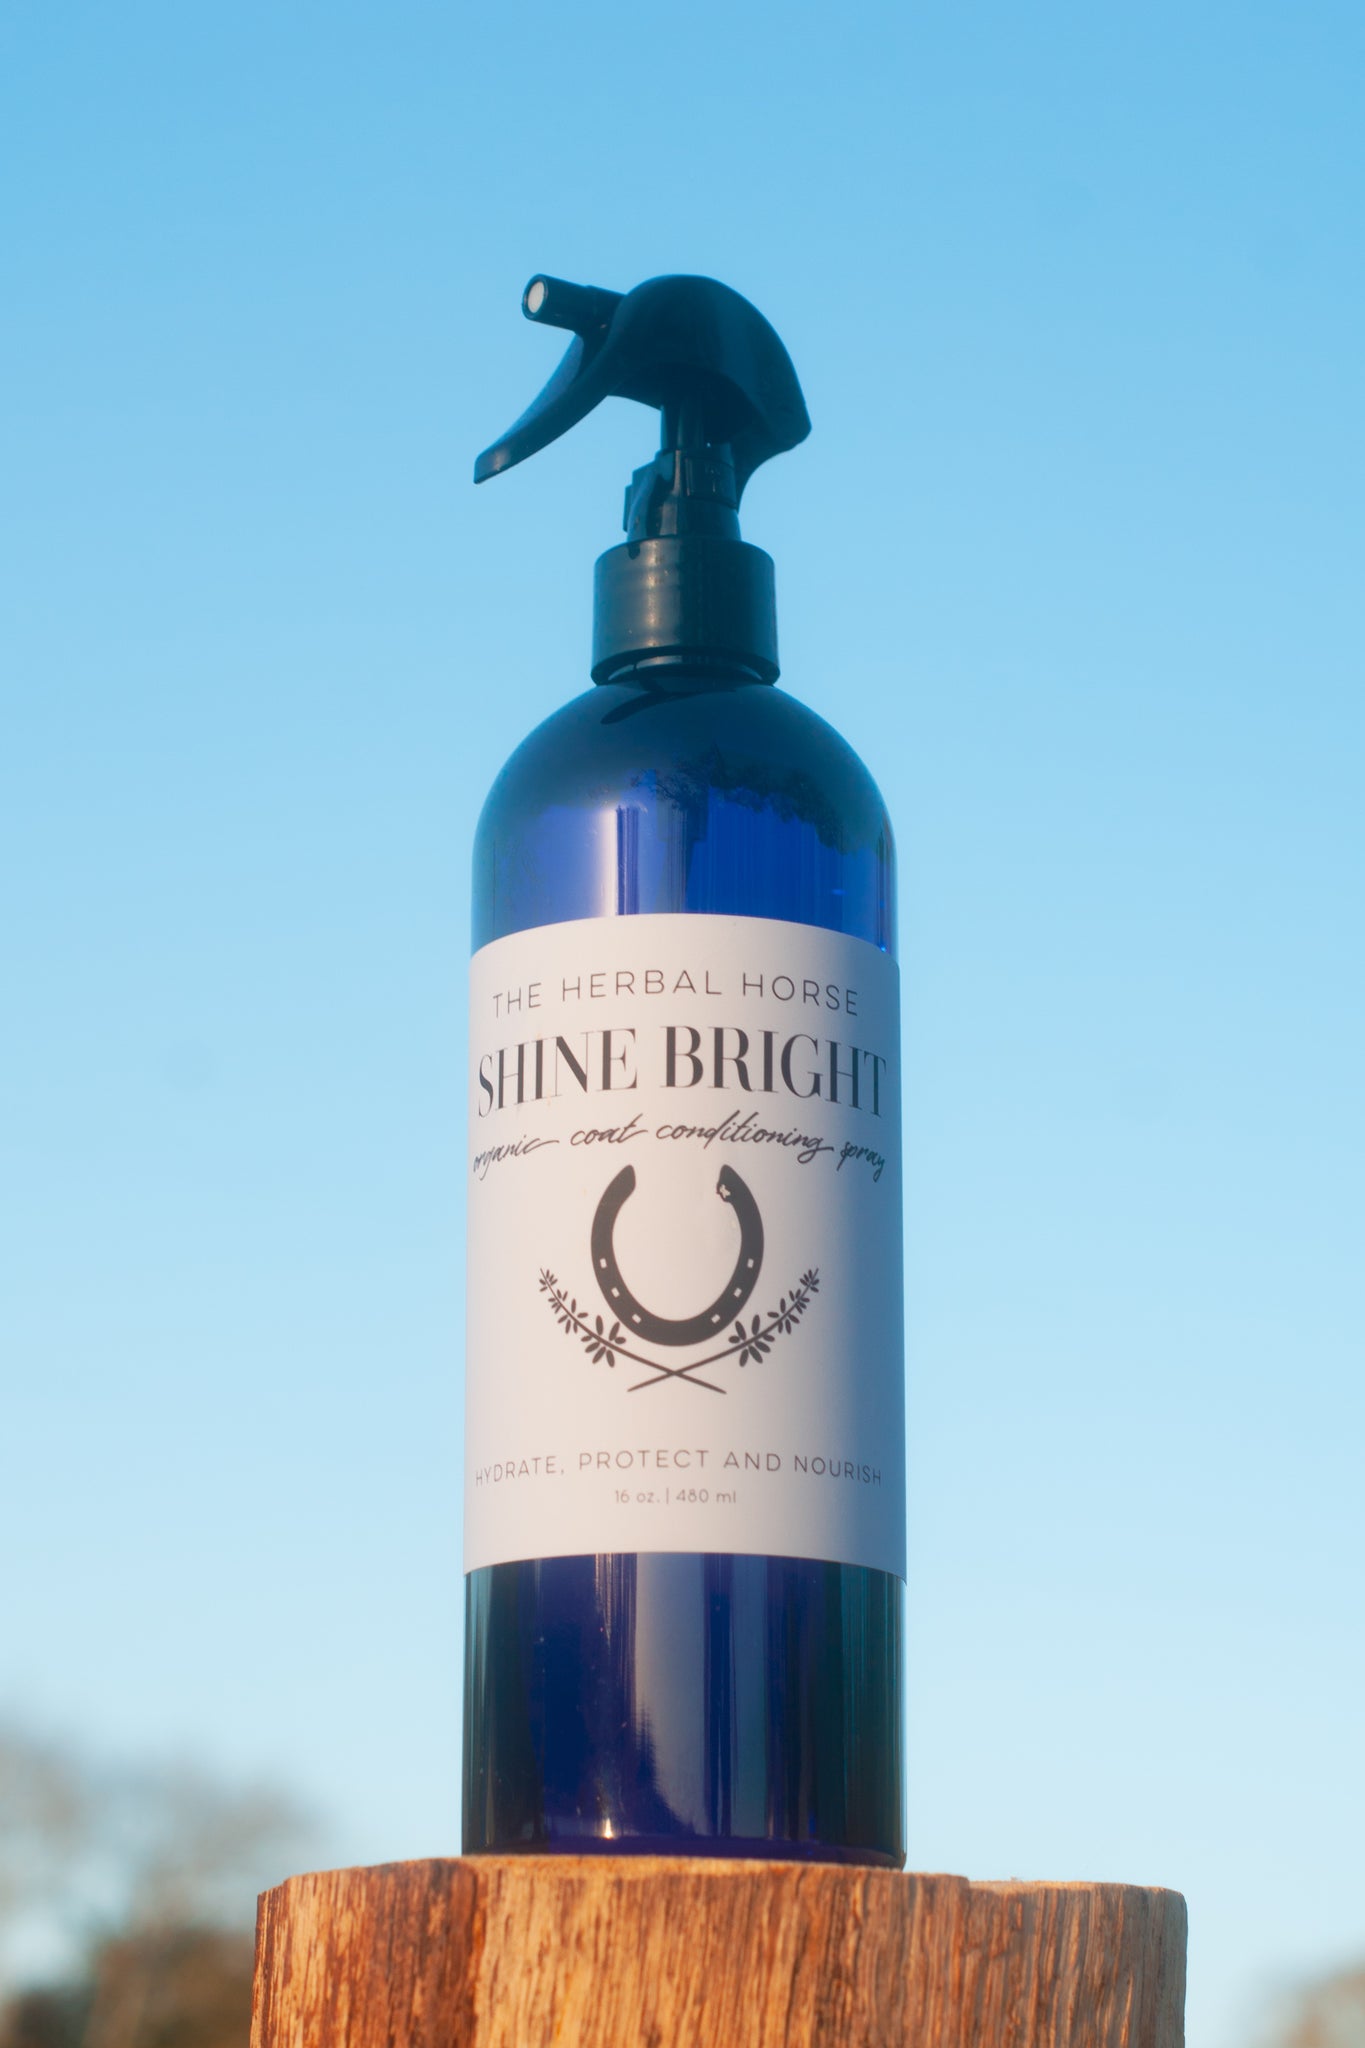 Coat Conditioning Spray- Shine Bright for Horses and Dogs – The